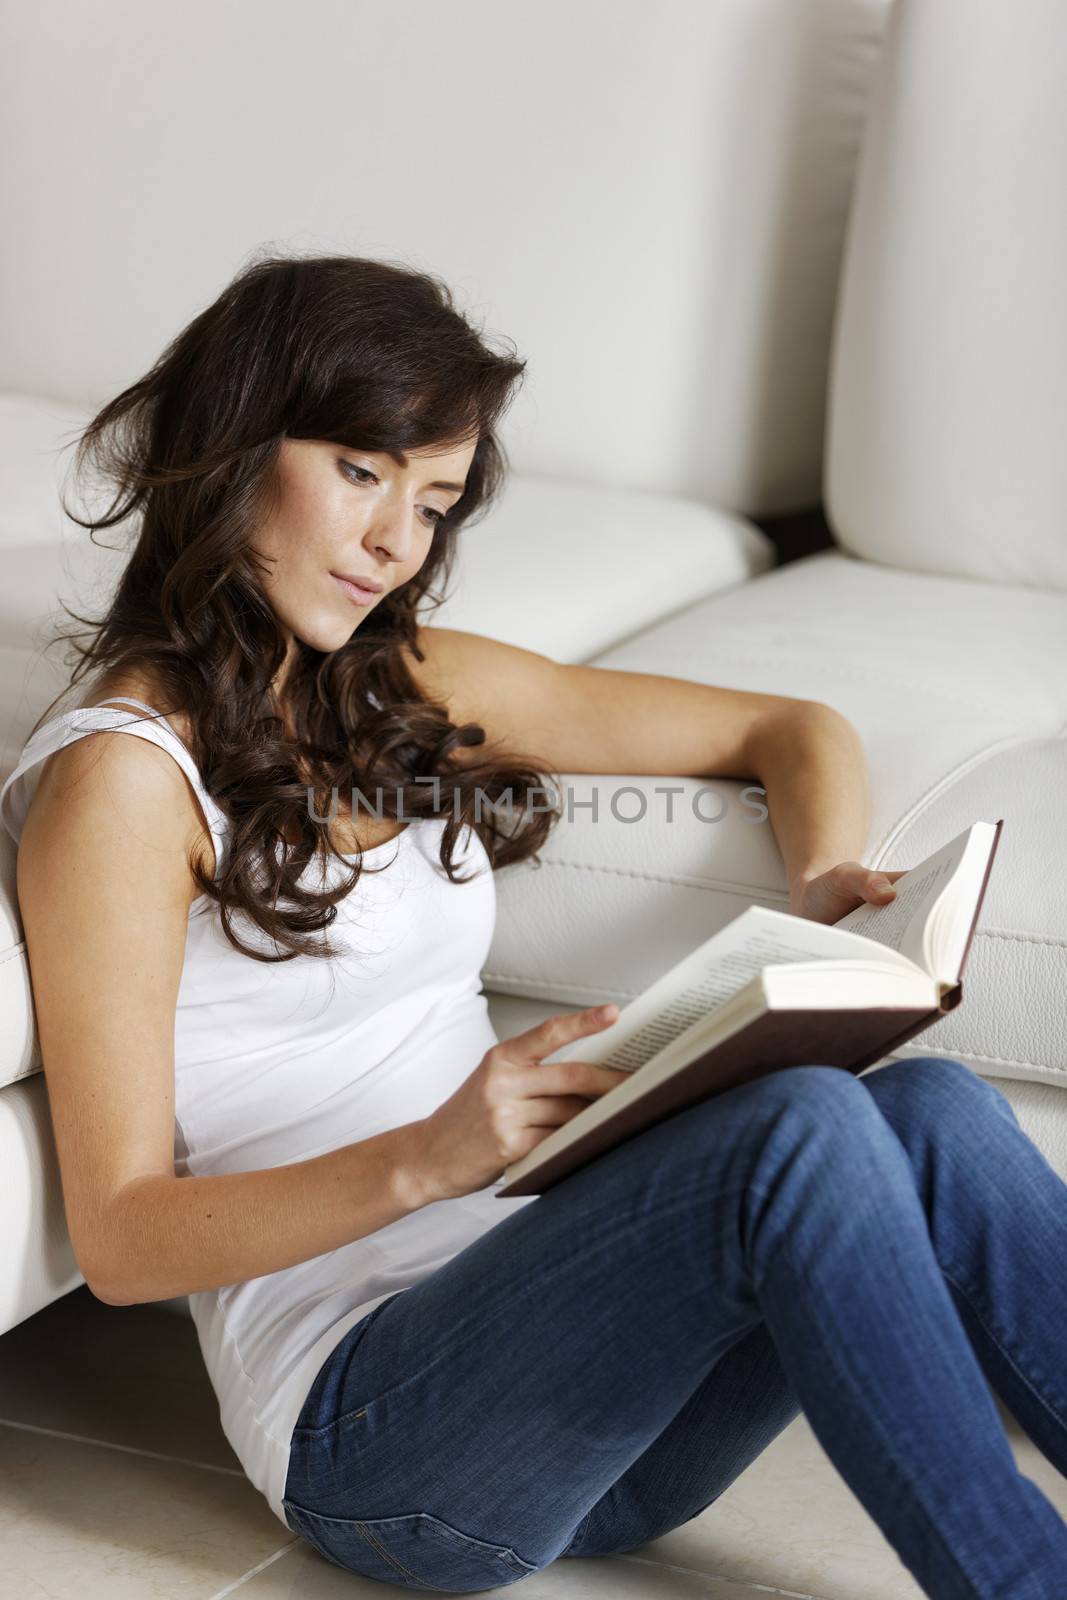 Young woman enjoying a good book in her living room.